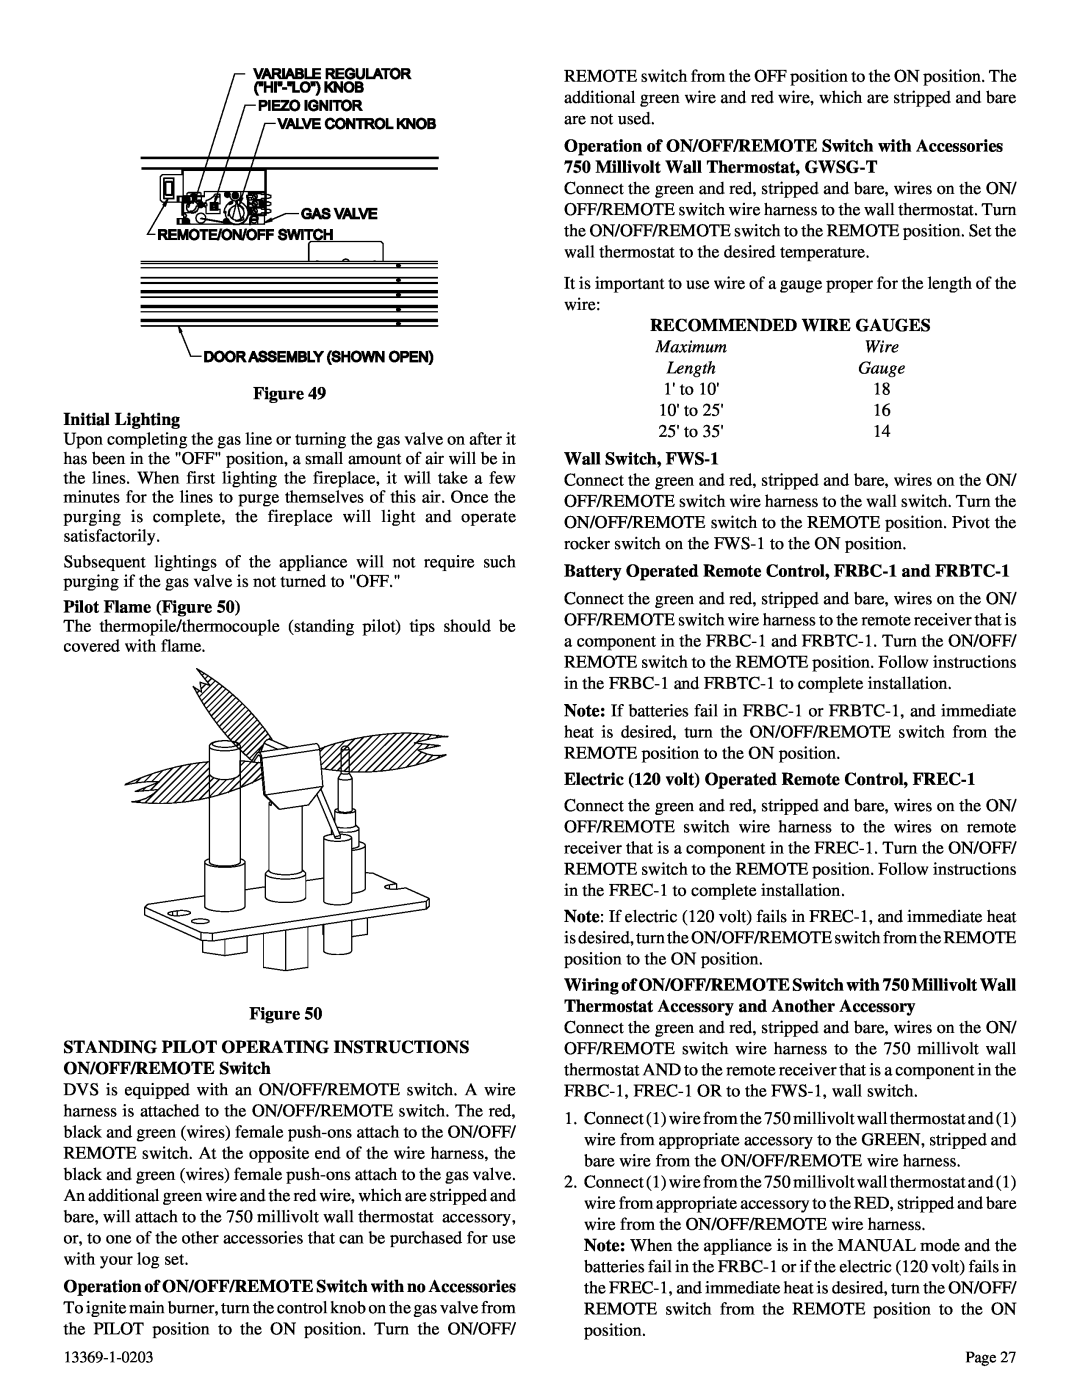 DVS 30-2 installation instructions Figure Initial Lighting, Pilot Flame Figure, Recommended Wire Gauges, Wall Switch, FWS-1 